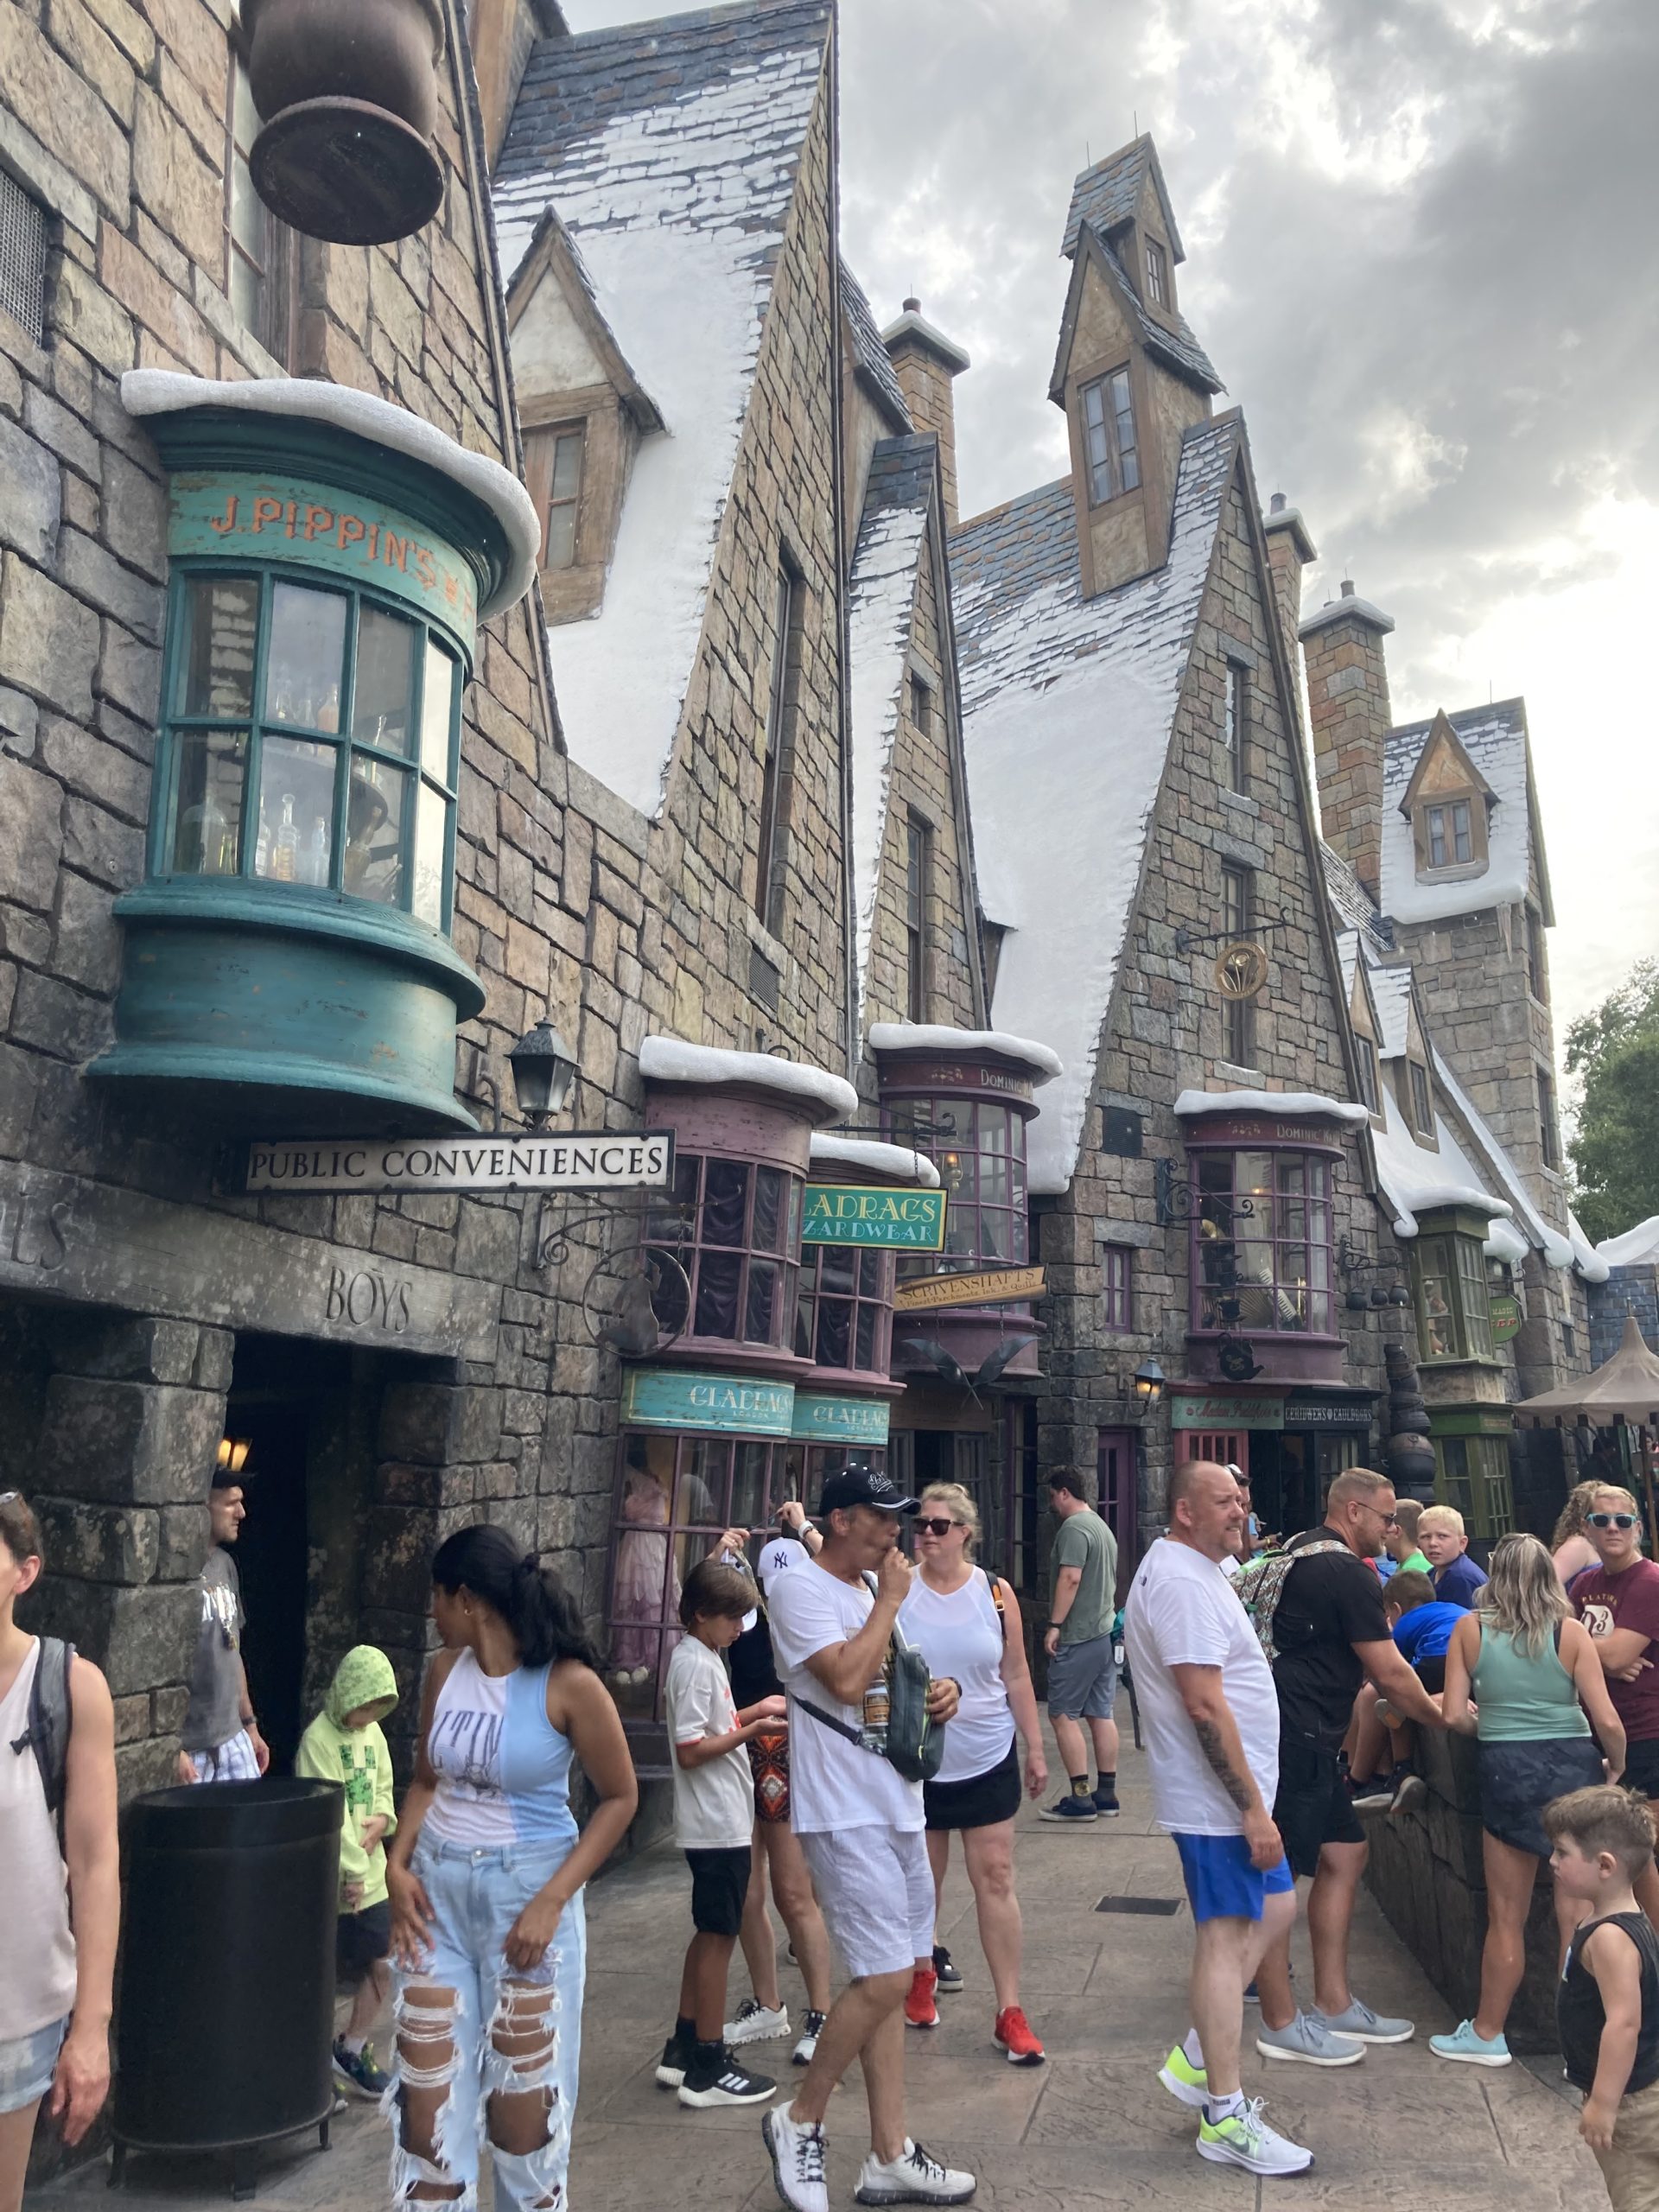 A view of the various wizarding shops that line the alley of Hogsmeade